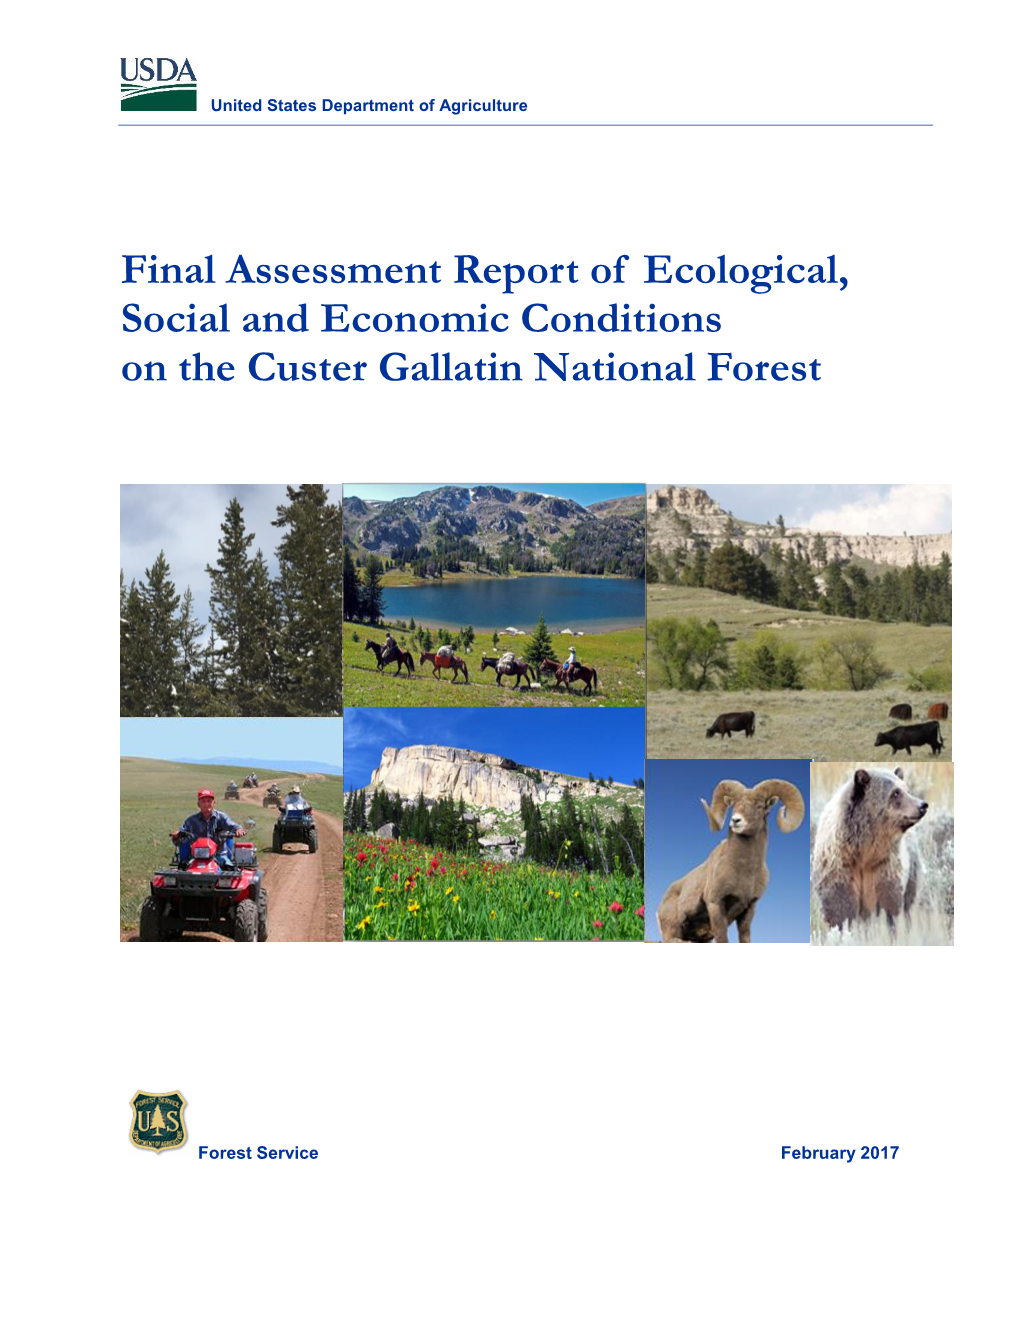 Final Assessment Report of Ecological, Social and Economic Conditions on the Custer Gallatin National Forest